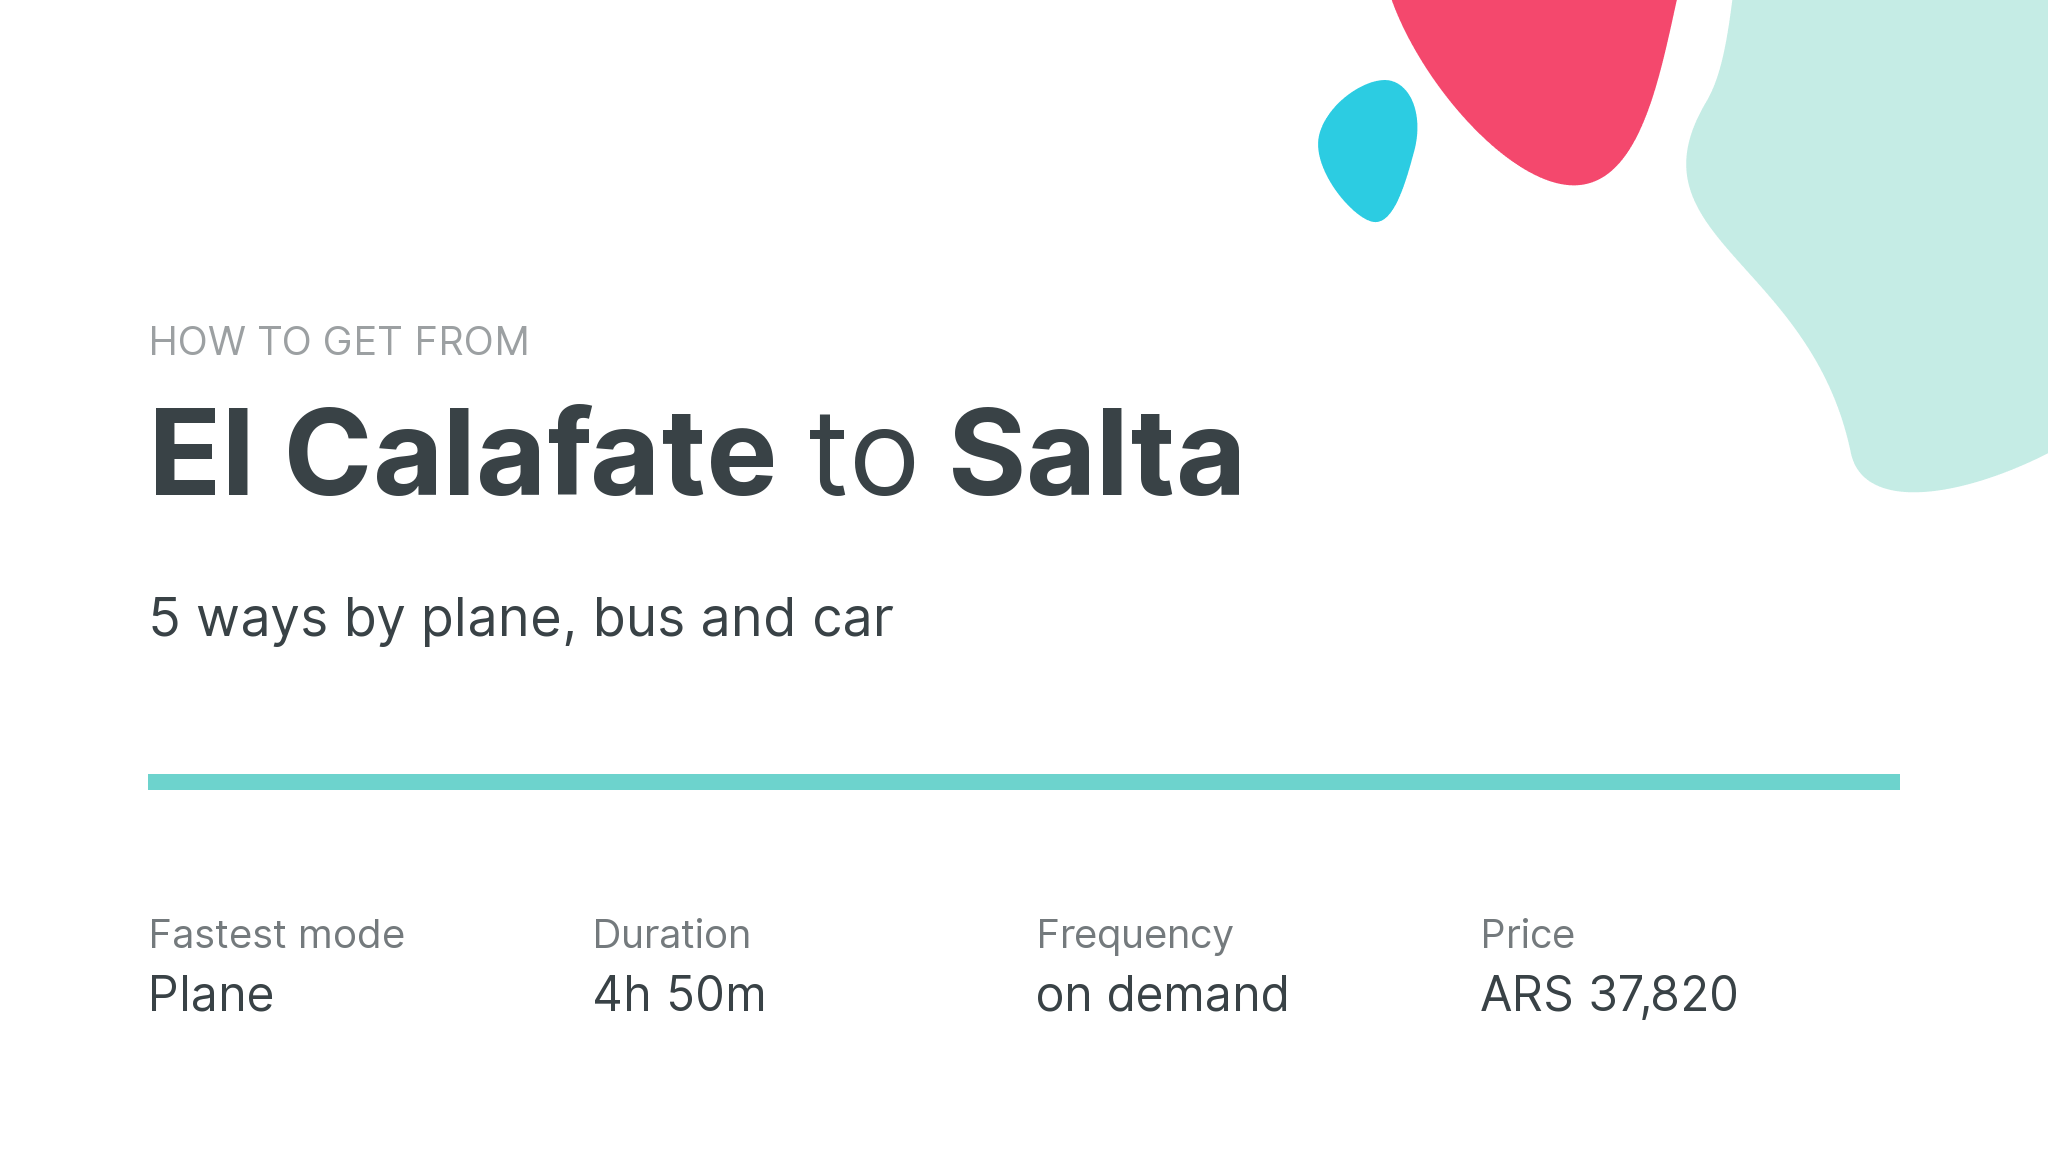 How do I get from El Calafate to Salta